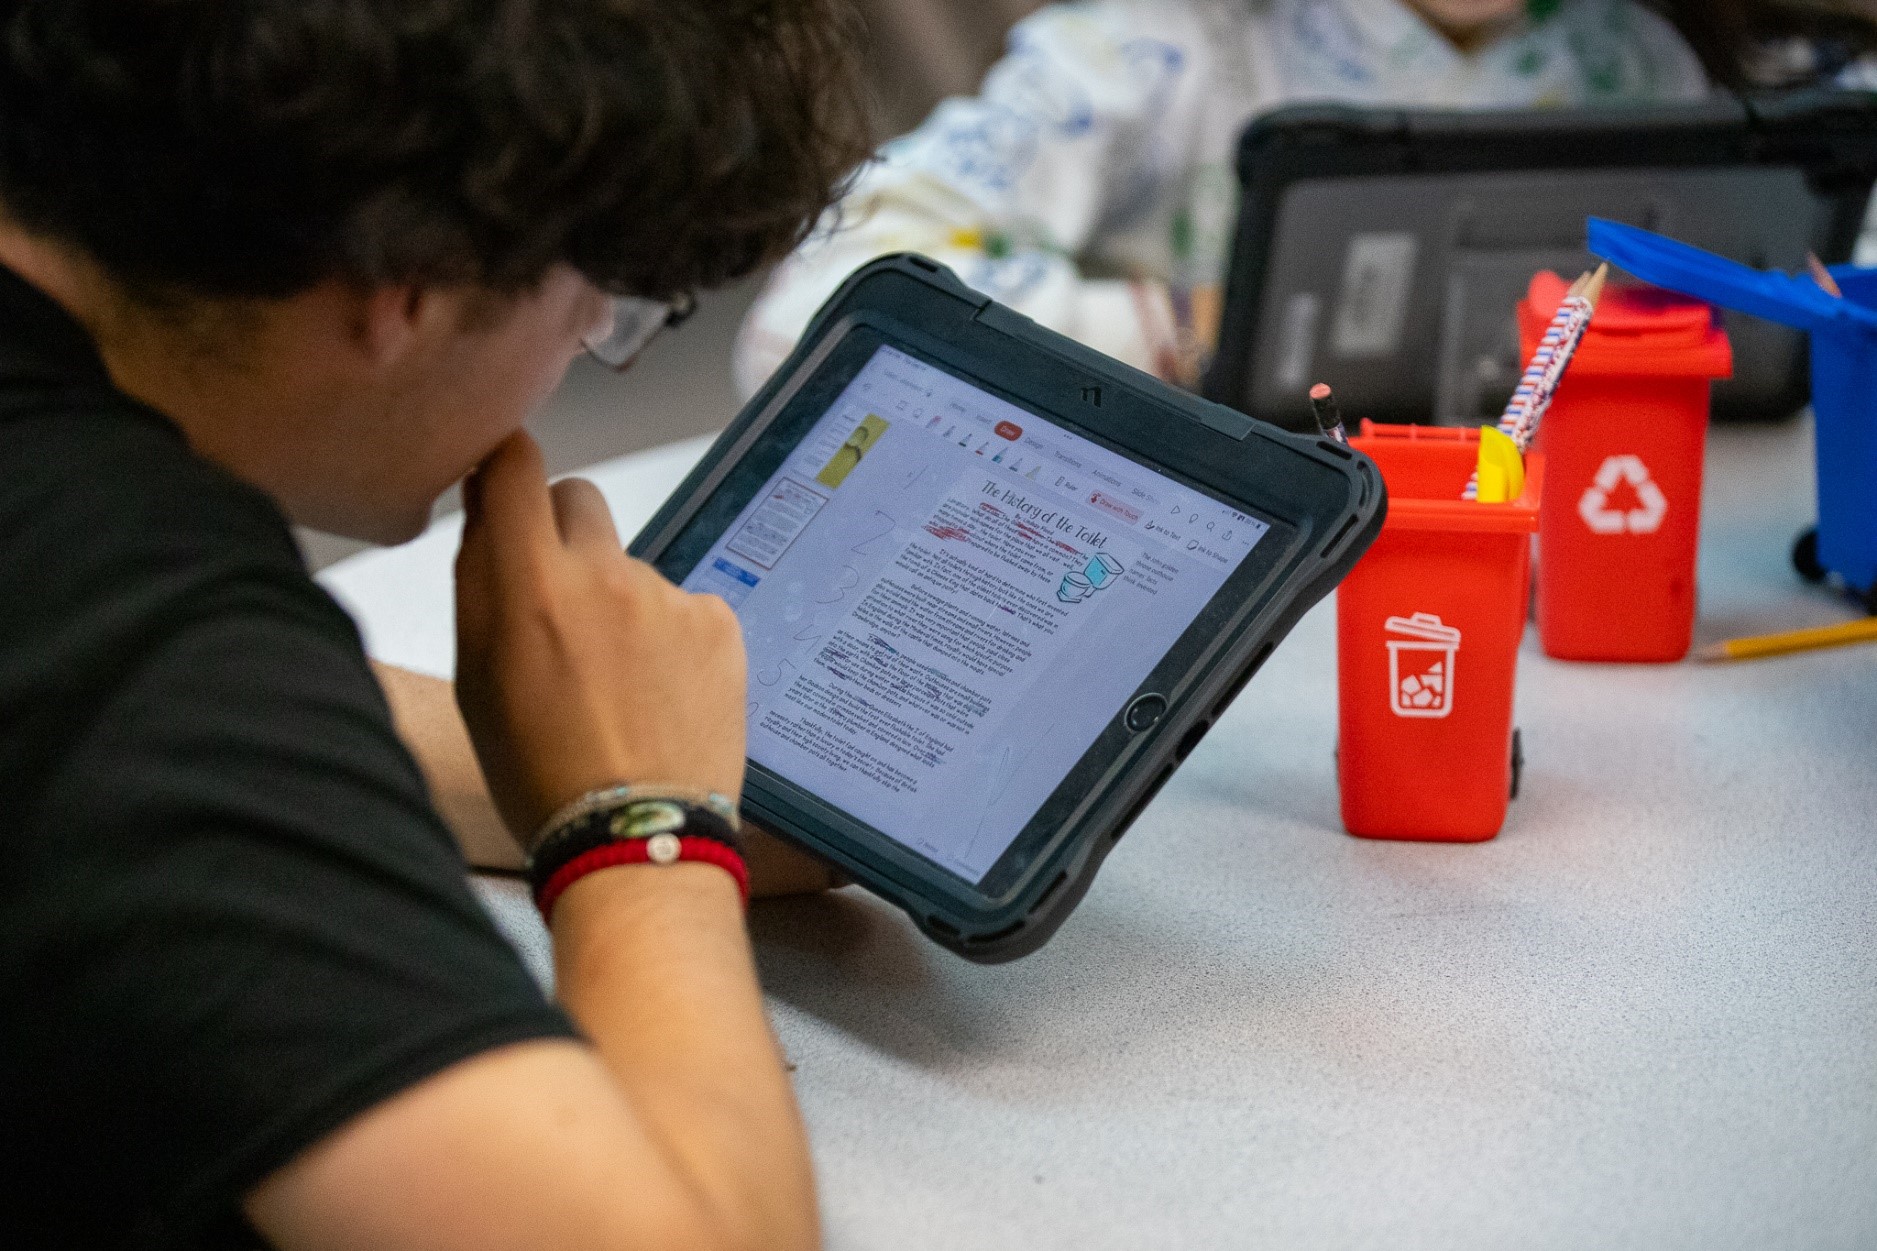 A Secrist student uses a tablet in class